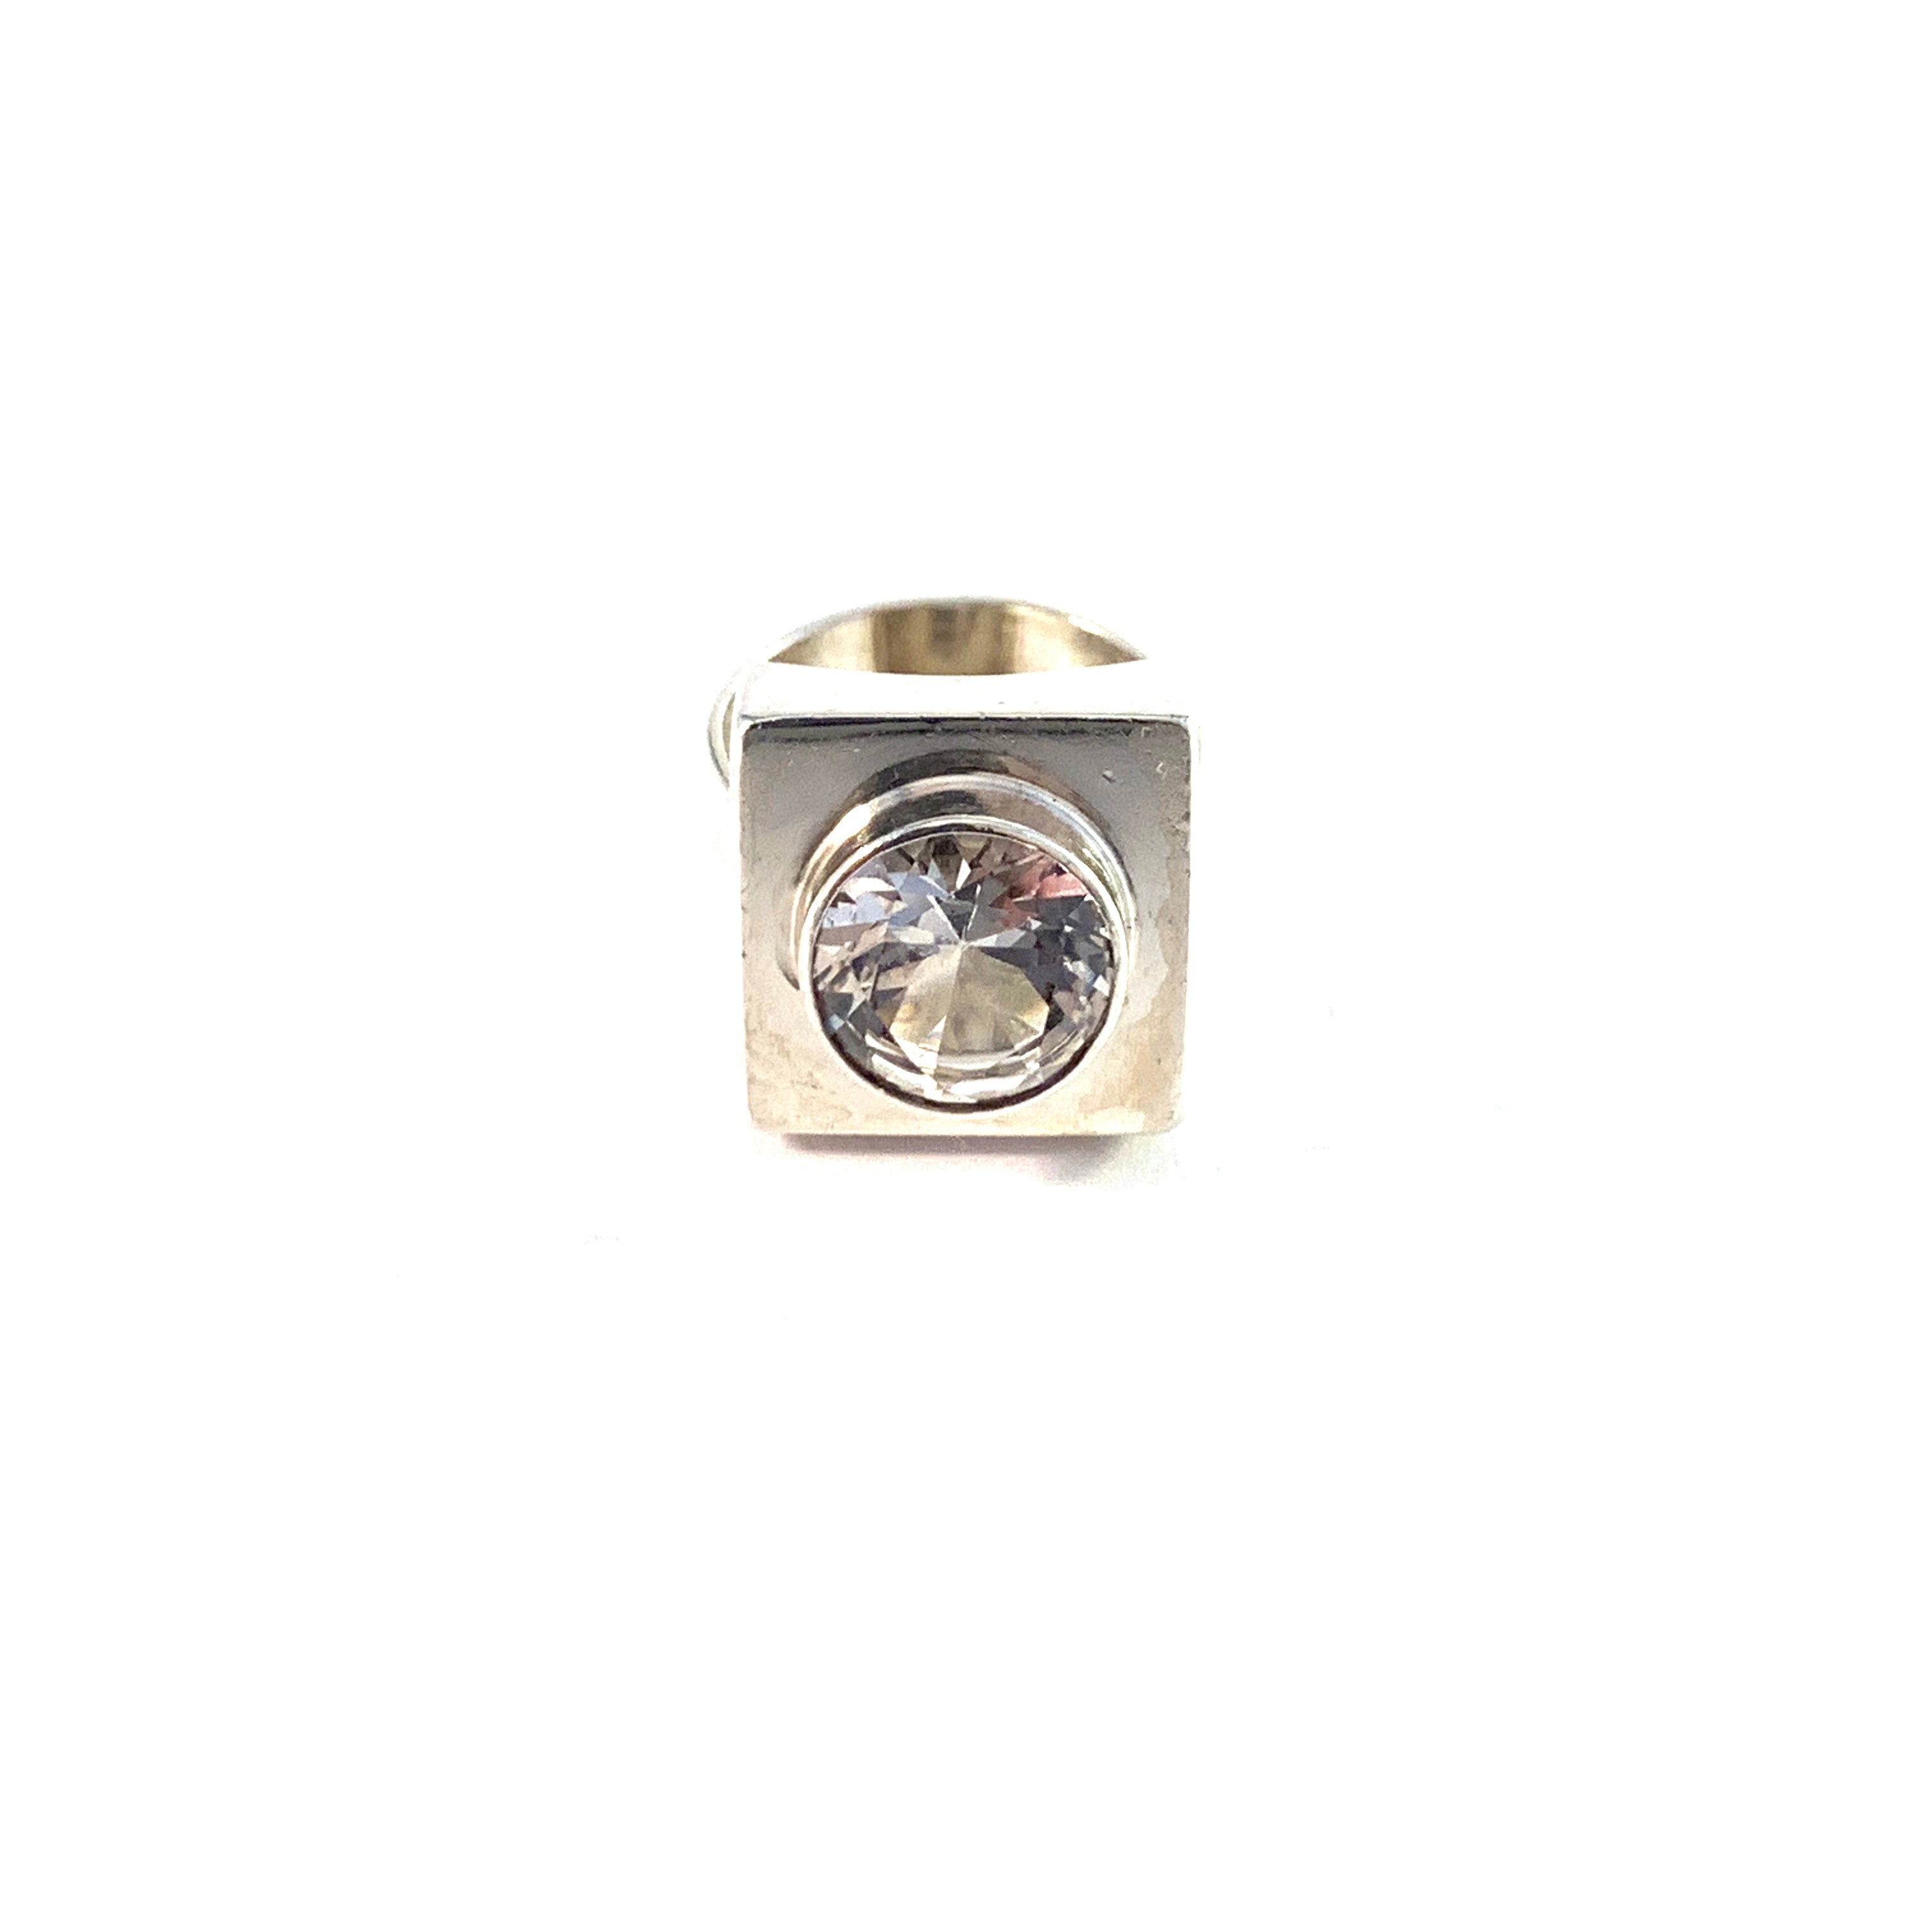 GUSSI, Sweden 1965. Sterling Silver Rock Crystal Pinky Ring.